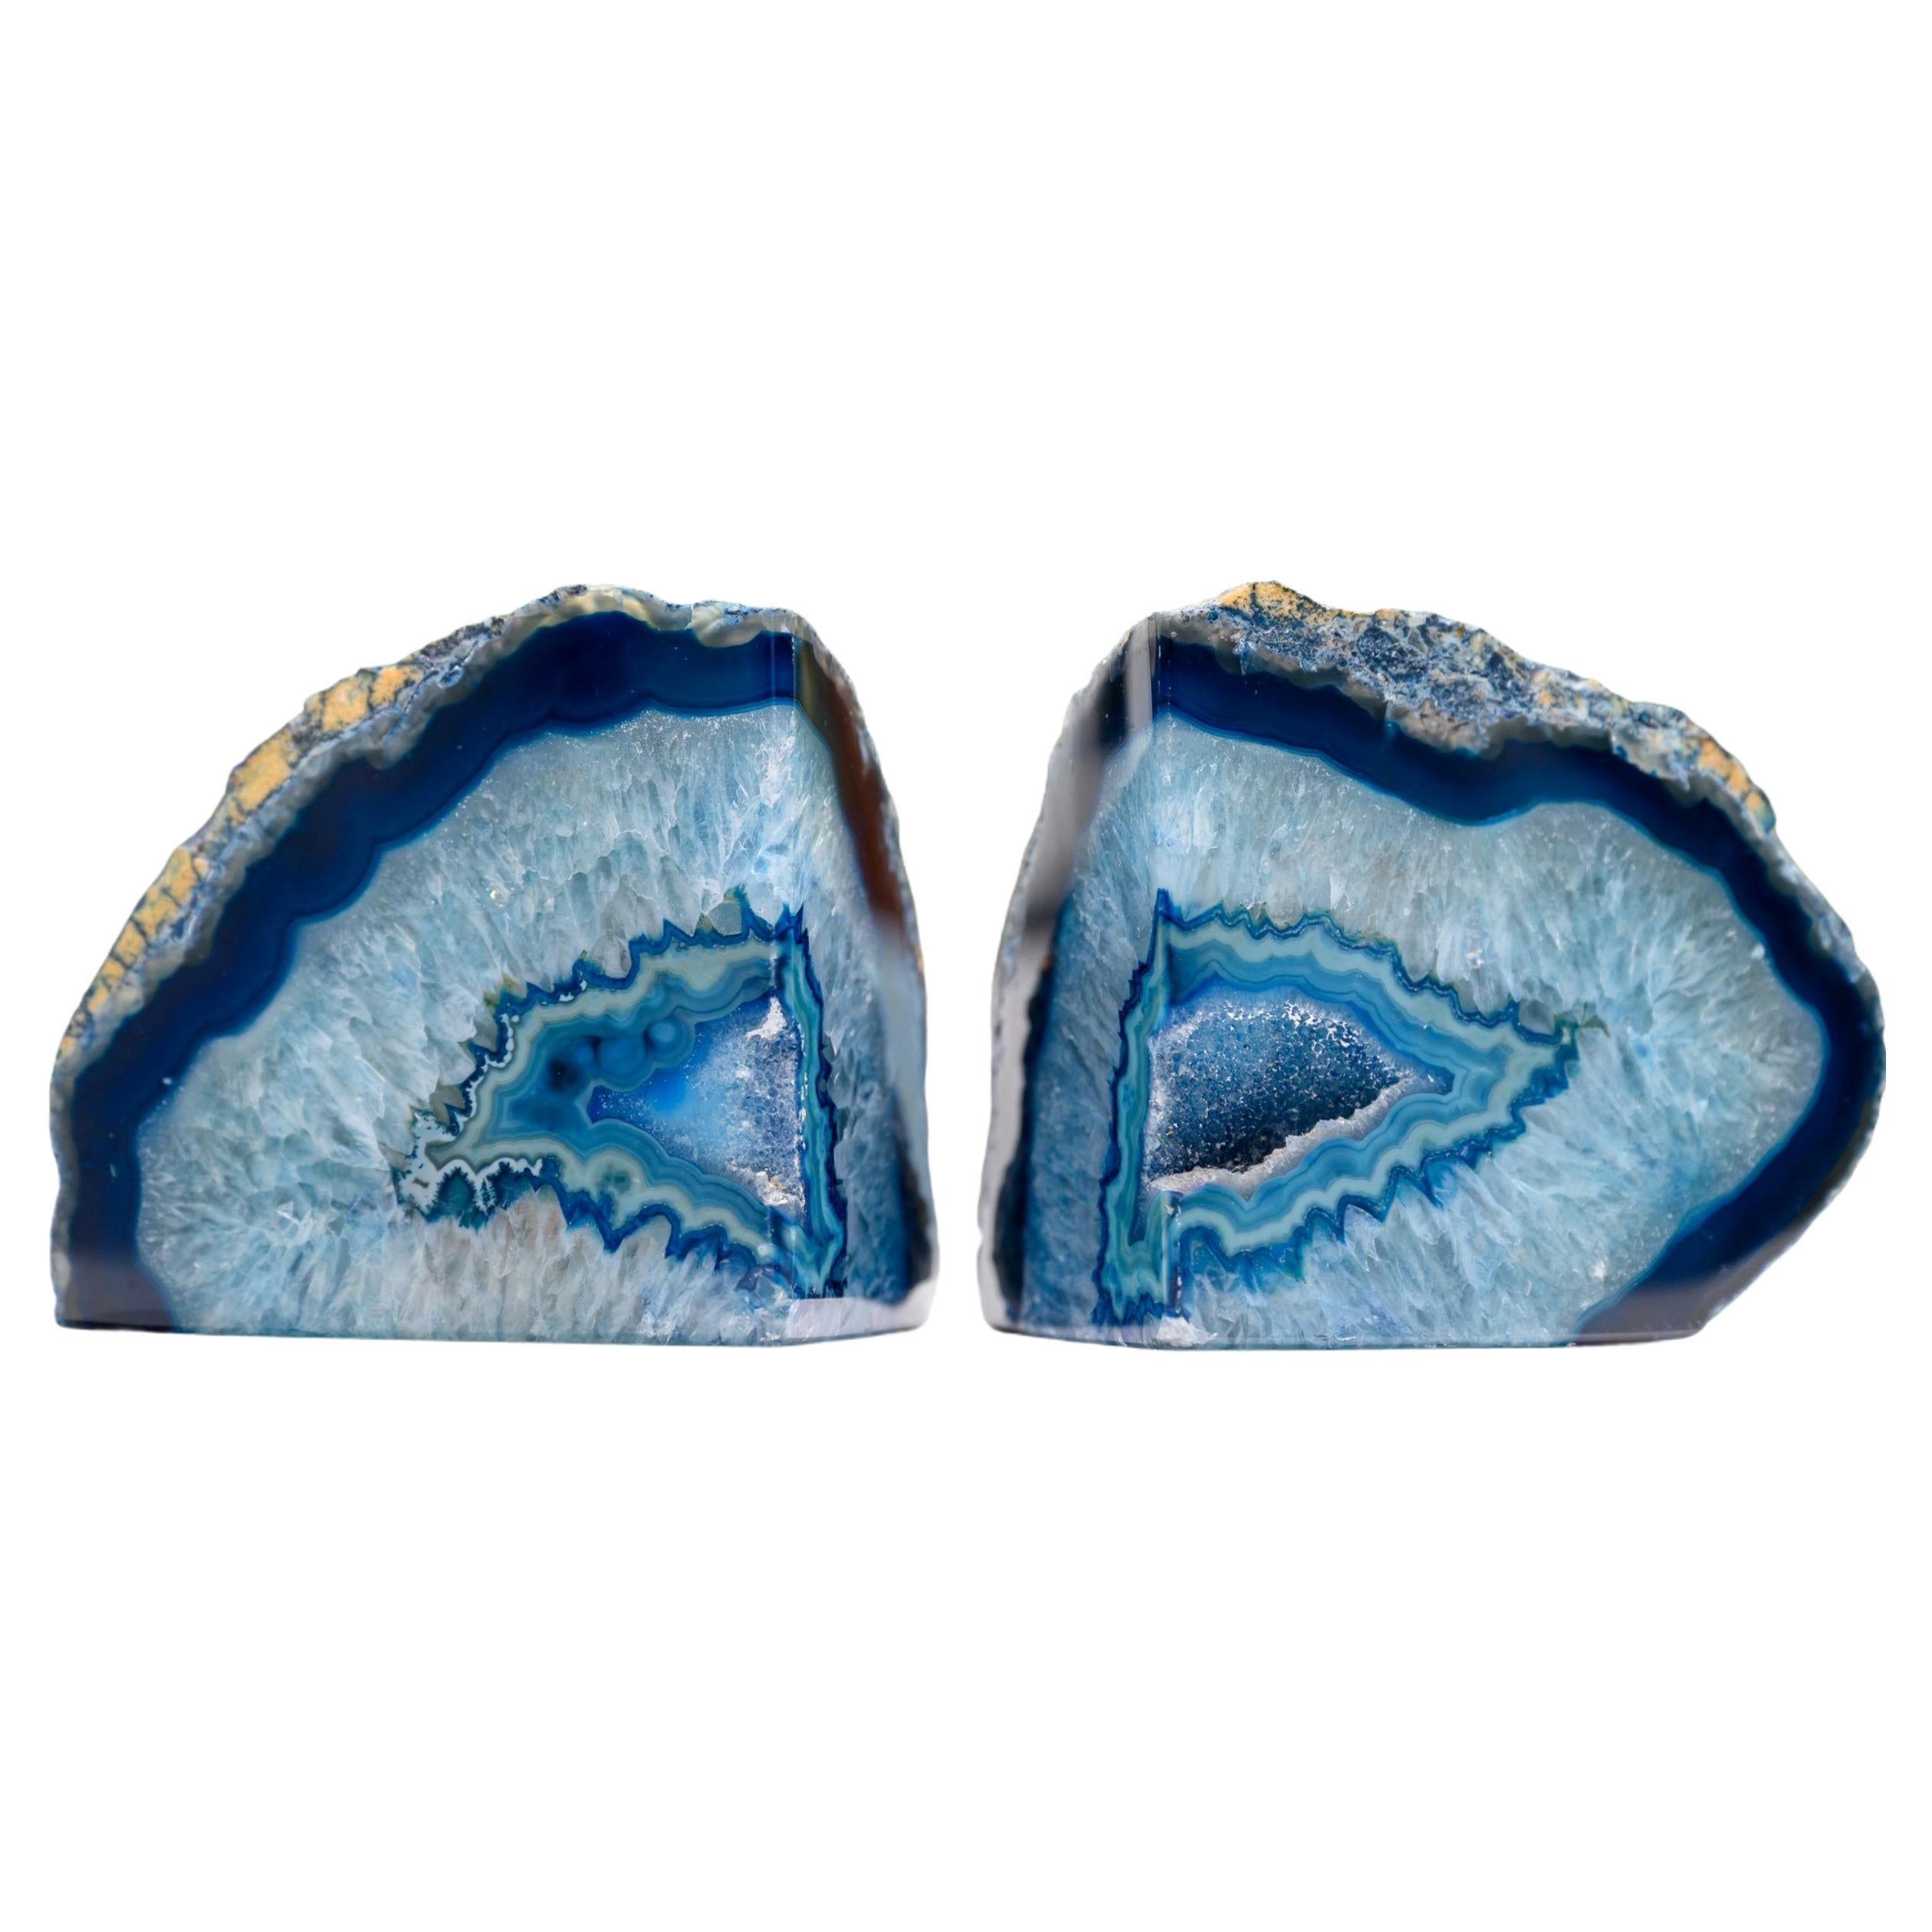 Impressive Pair of Blue Geode Bookends